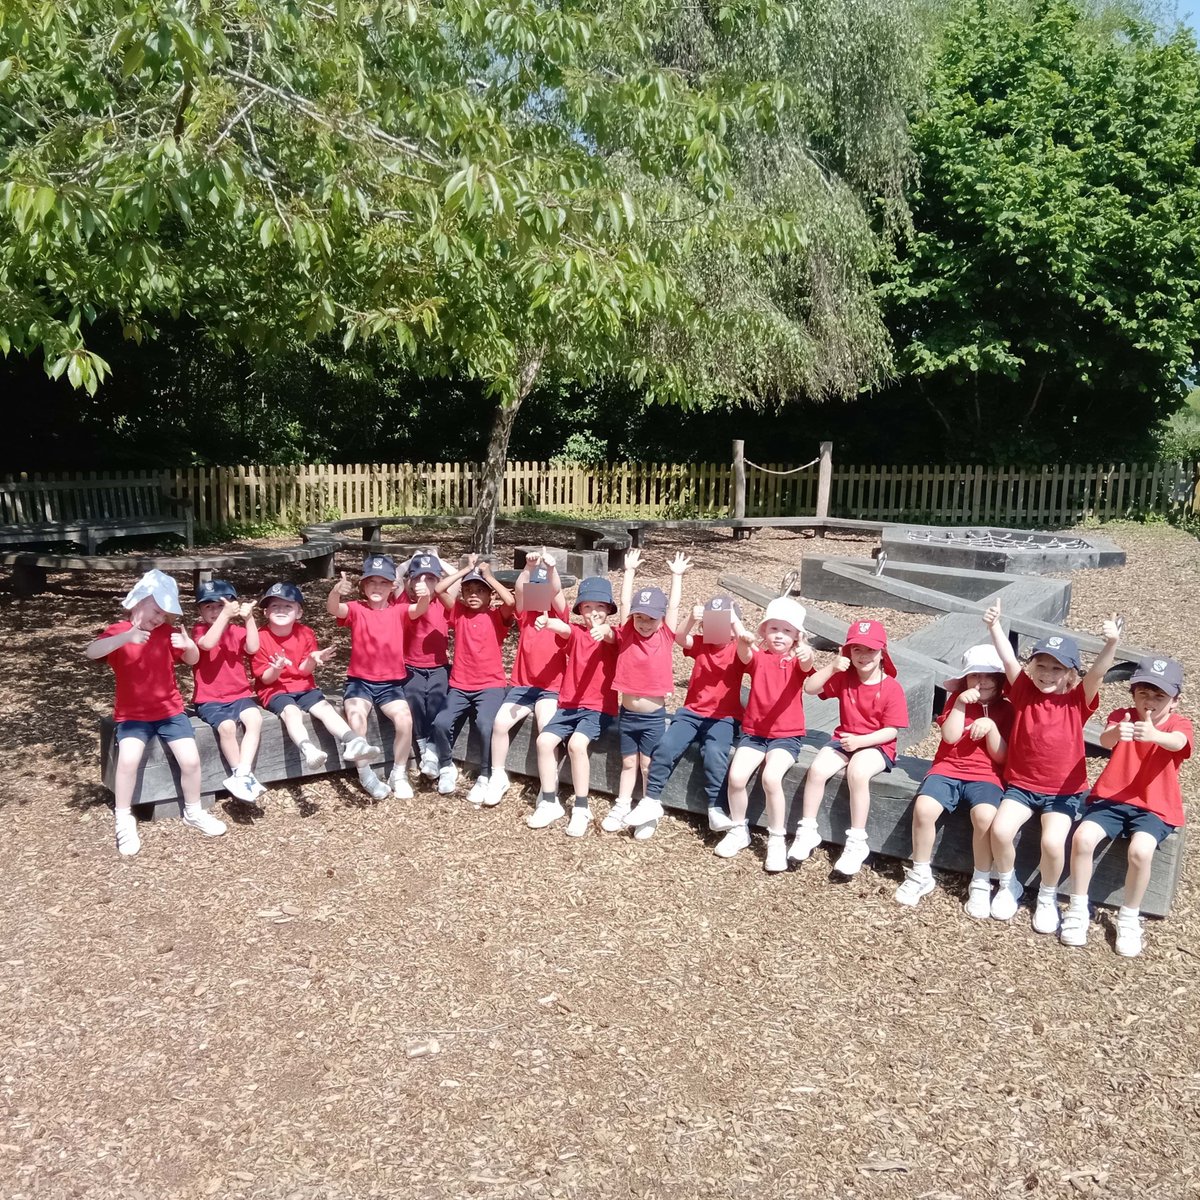 Our Reception children had a wonderful time @WWTArundel. They went pond dipping, catching a multitude of different creatures, including water boatmen, damselfly nymphs, ramshorn snails, very fast-swimming diving beetles, a variety of worms, and some leeches. #LPW